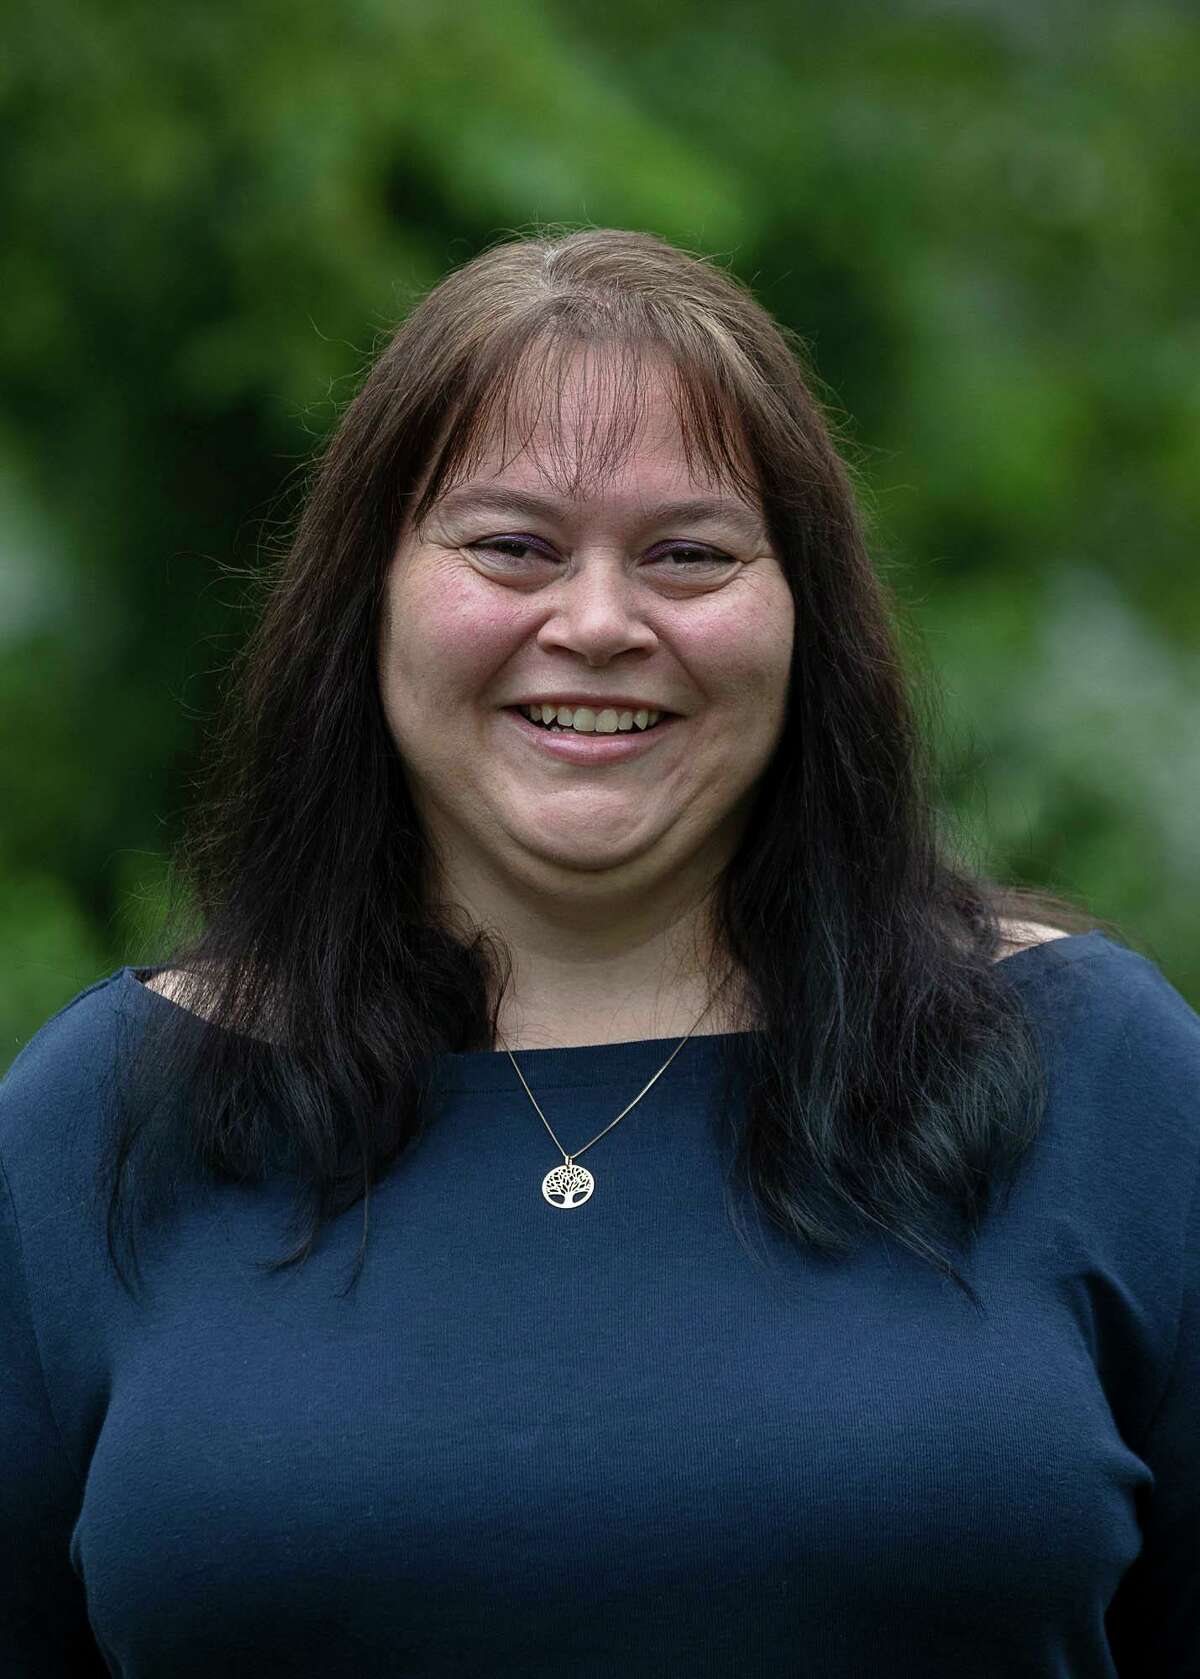 April Graves is a Democrat running for a spot on Portland’s Board of Selectmen.